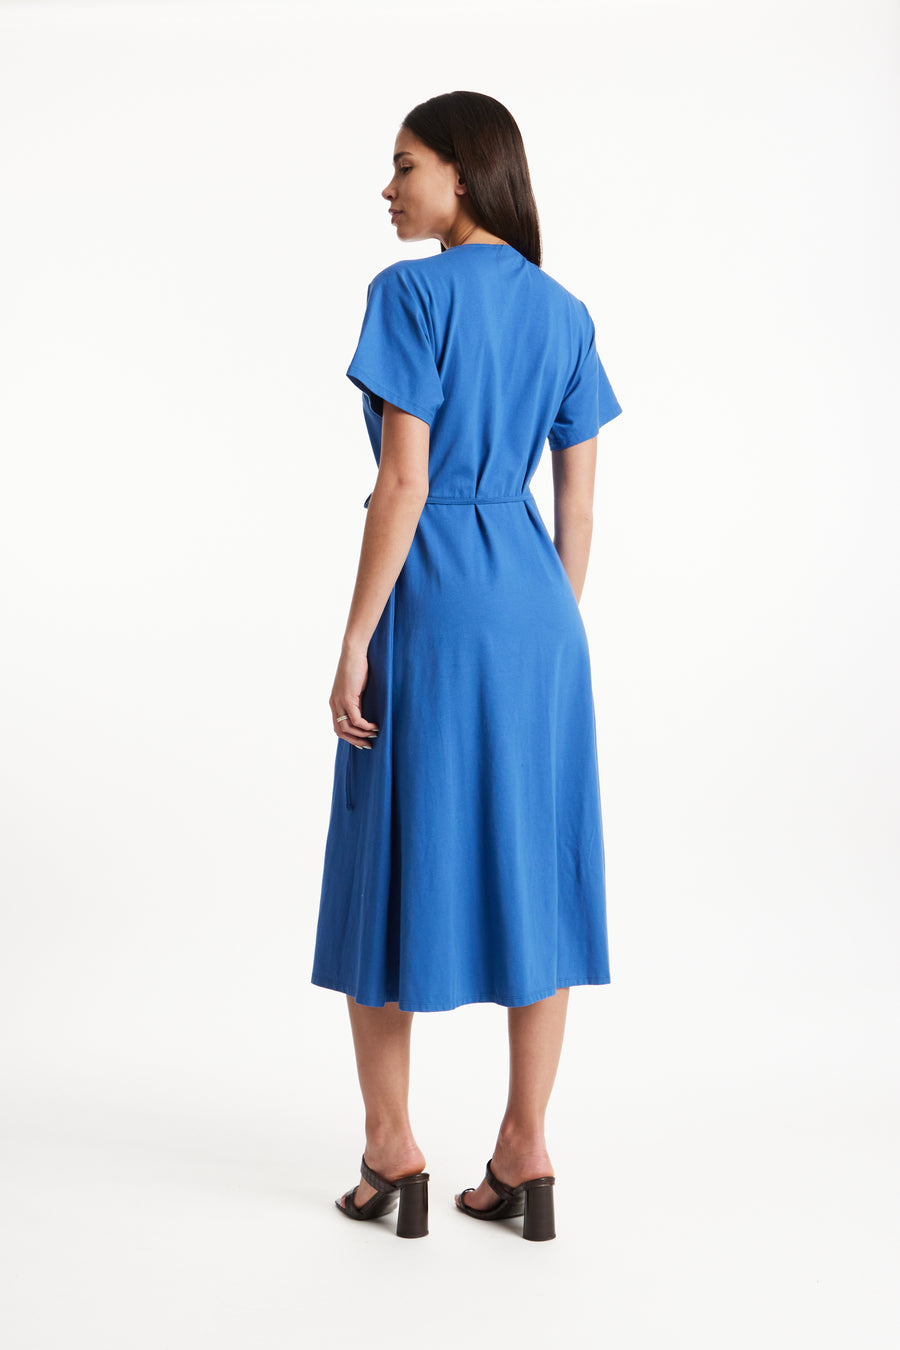 People Tree Fair Trade, Ethical & Sustainable Leora Wrap Dress in Blue 95% organic certified cotton, 5% elastane